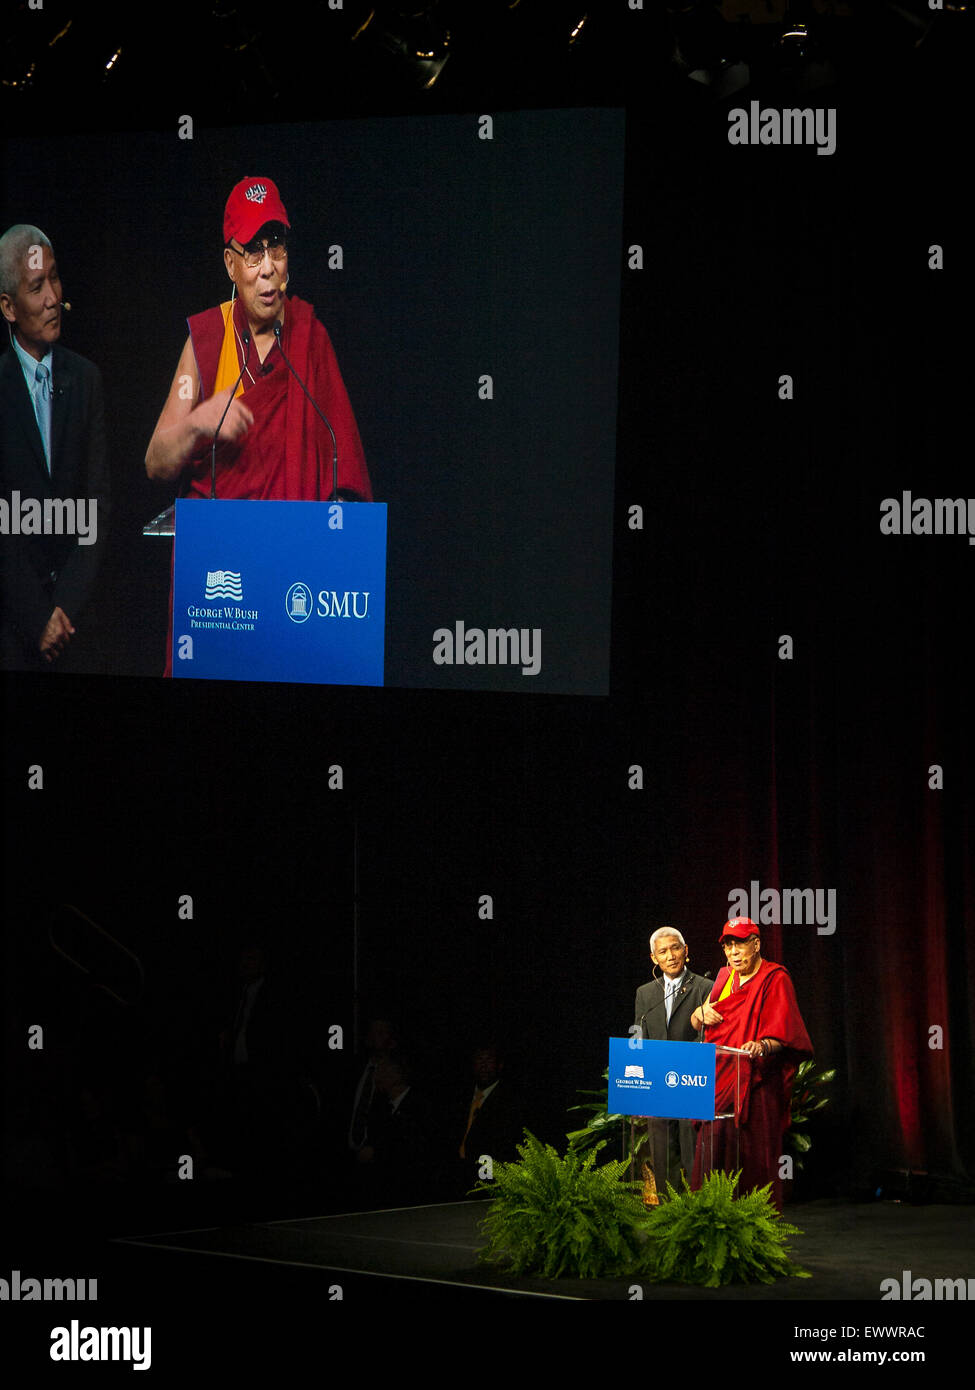 Dallas, Texas, USA. 1st July, 2015. The Dalai Lama speaks at the Moody Coliseum before 5200 people alongside is his translator and he wears a SMU cap. Credit:  J. G. Domke/Alamy Live News Stock Photo